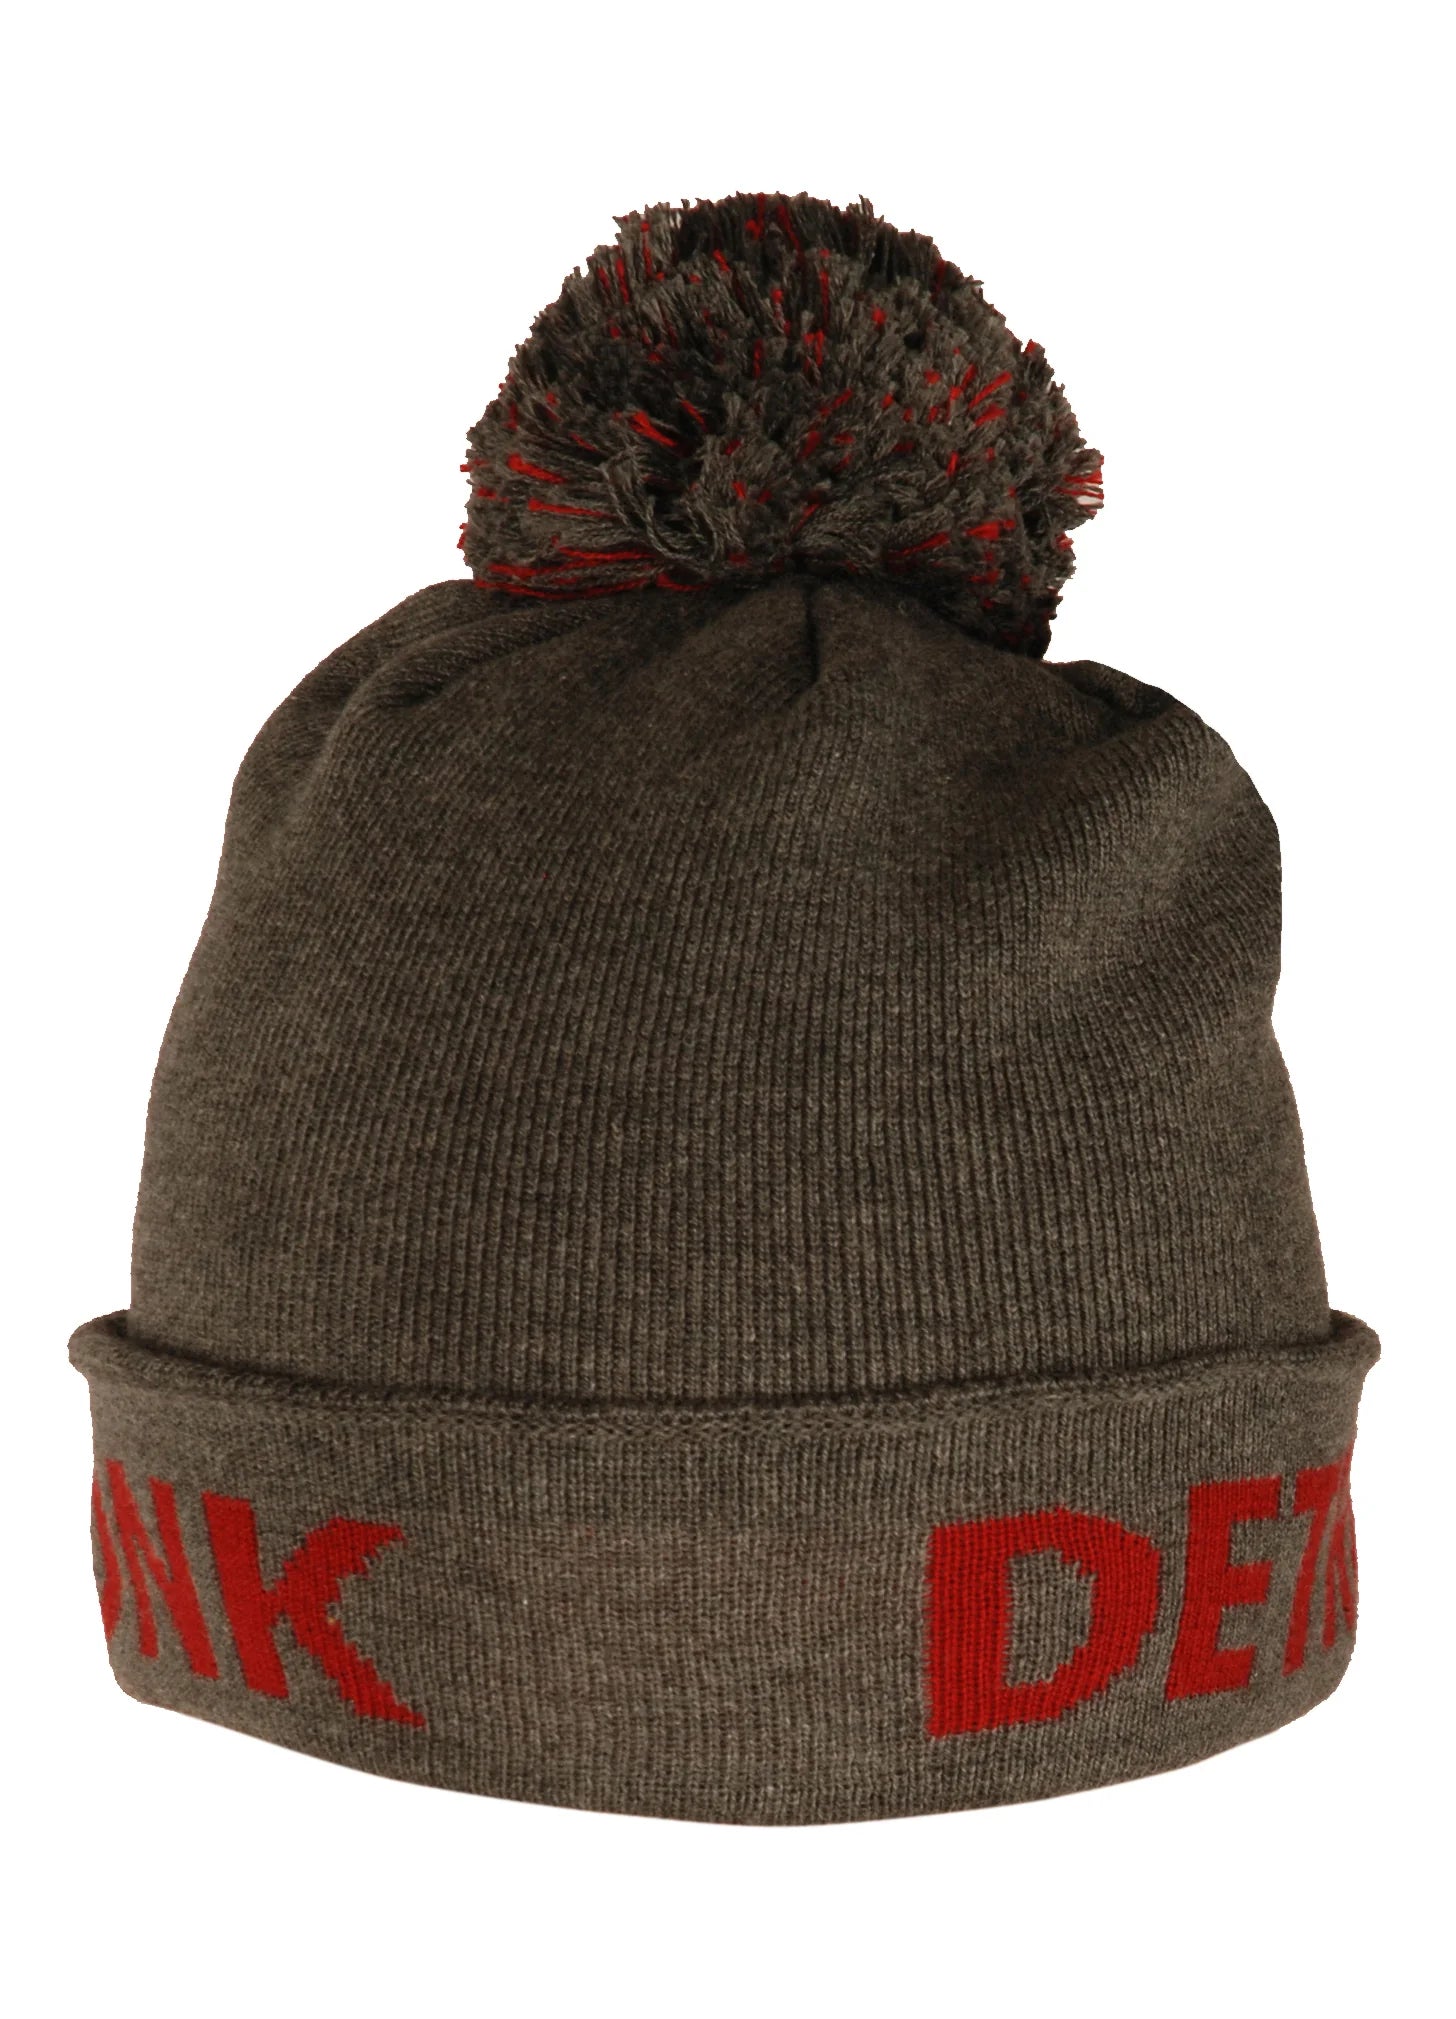 KRONK WOOLY HAT CHARCOAL/RED